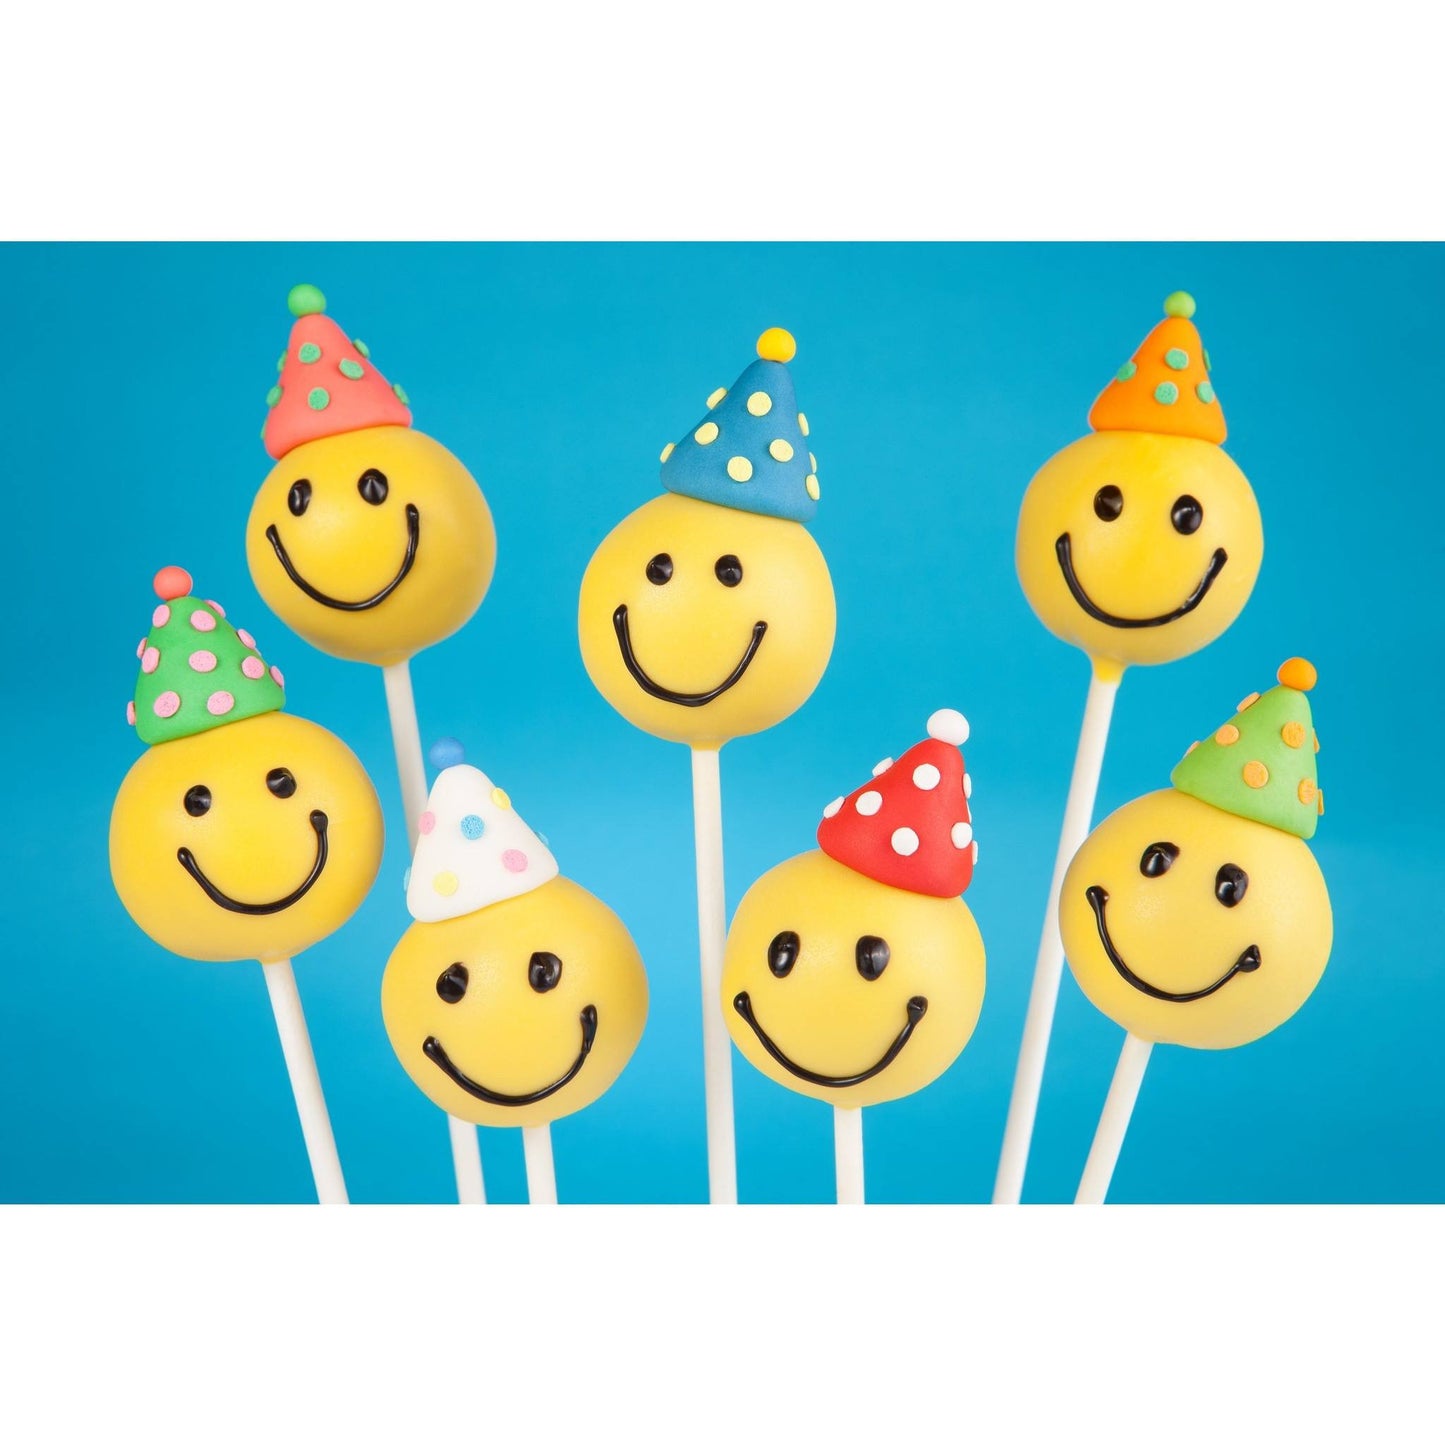 Buy Emoji Cake Pops With Party Hats - Cake Pops Parties